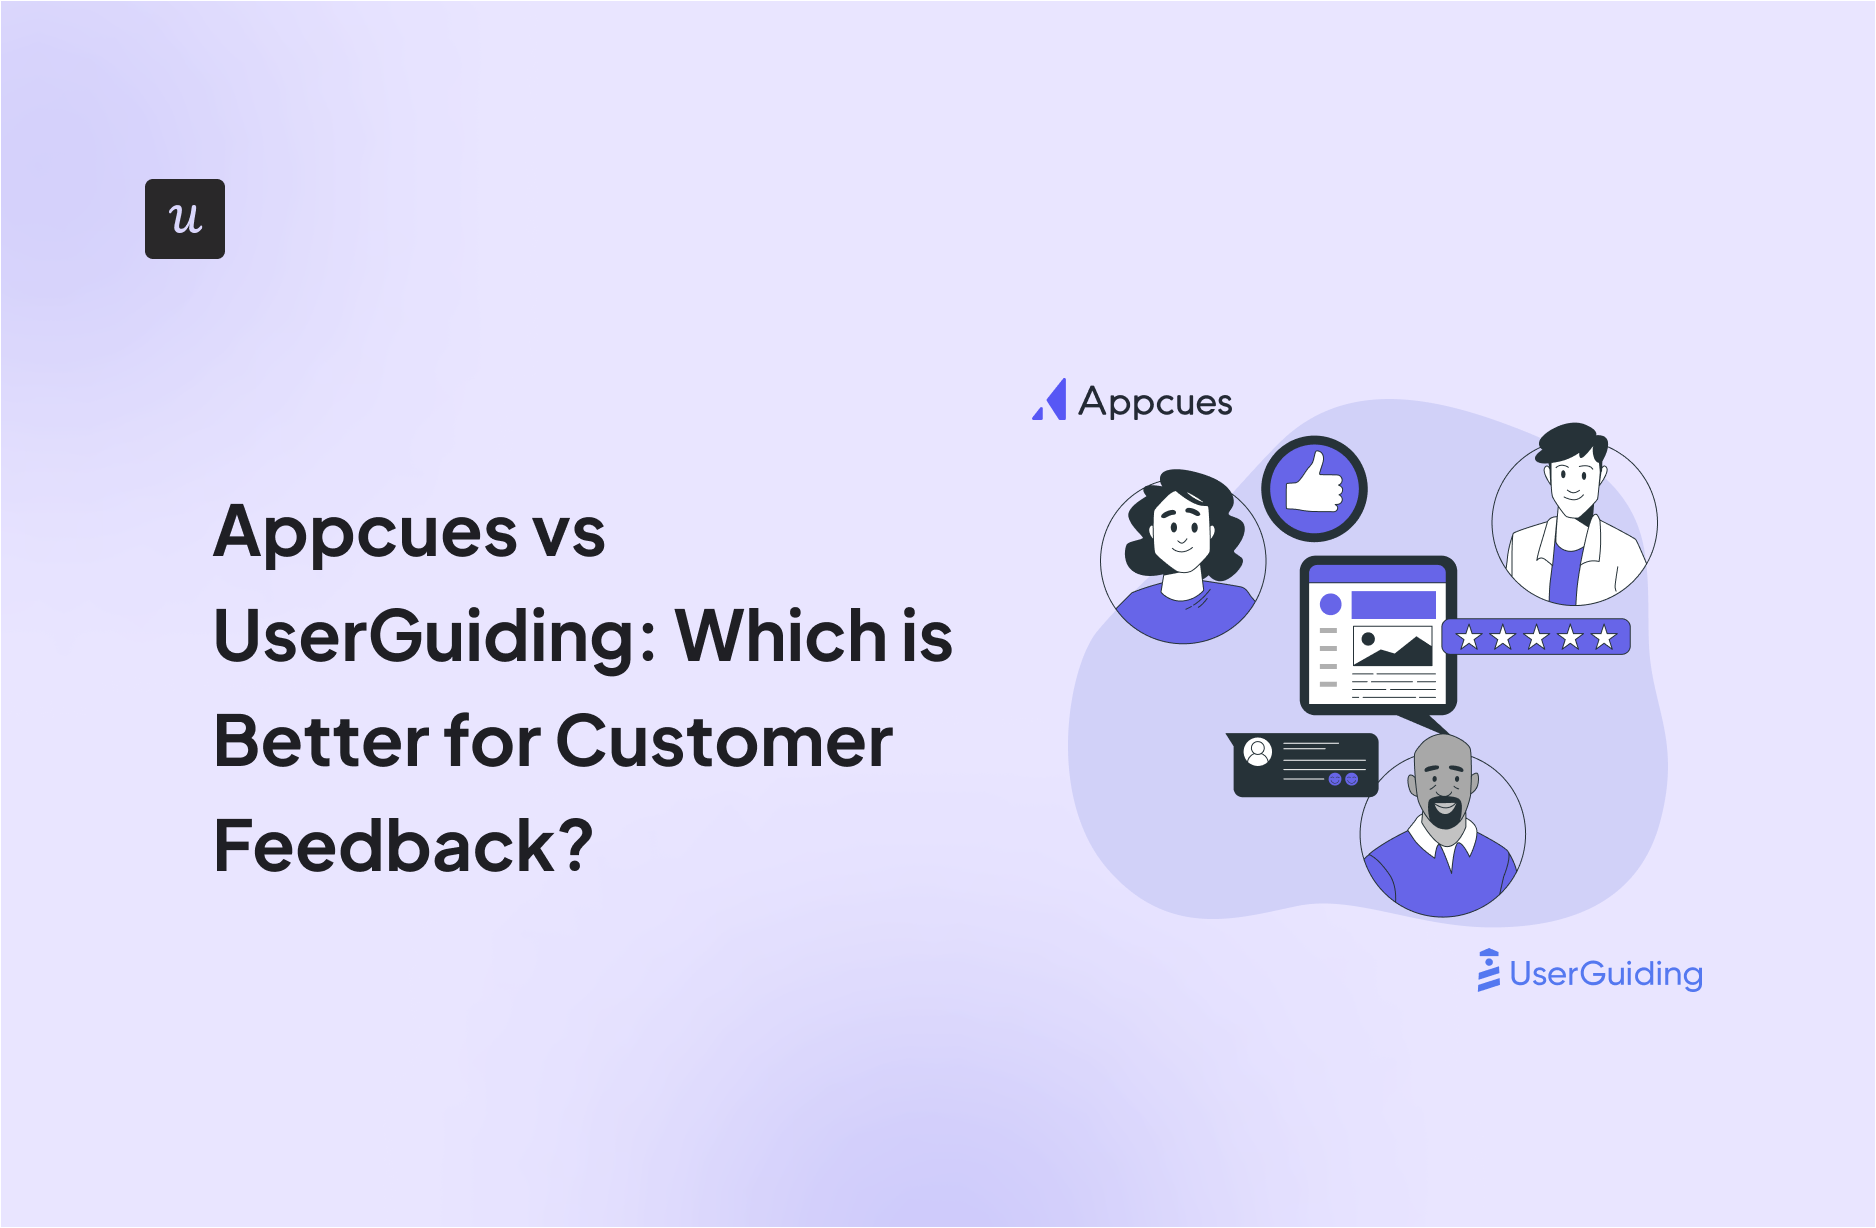 Appcues vs UserGuiding: Which is Better for Customer Feedback?